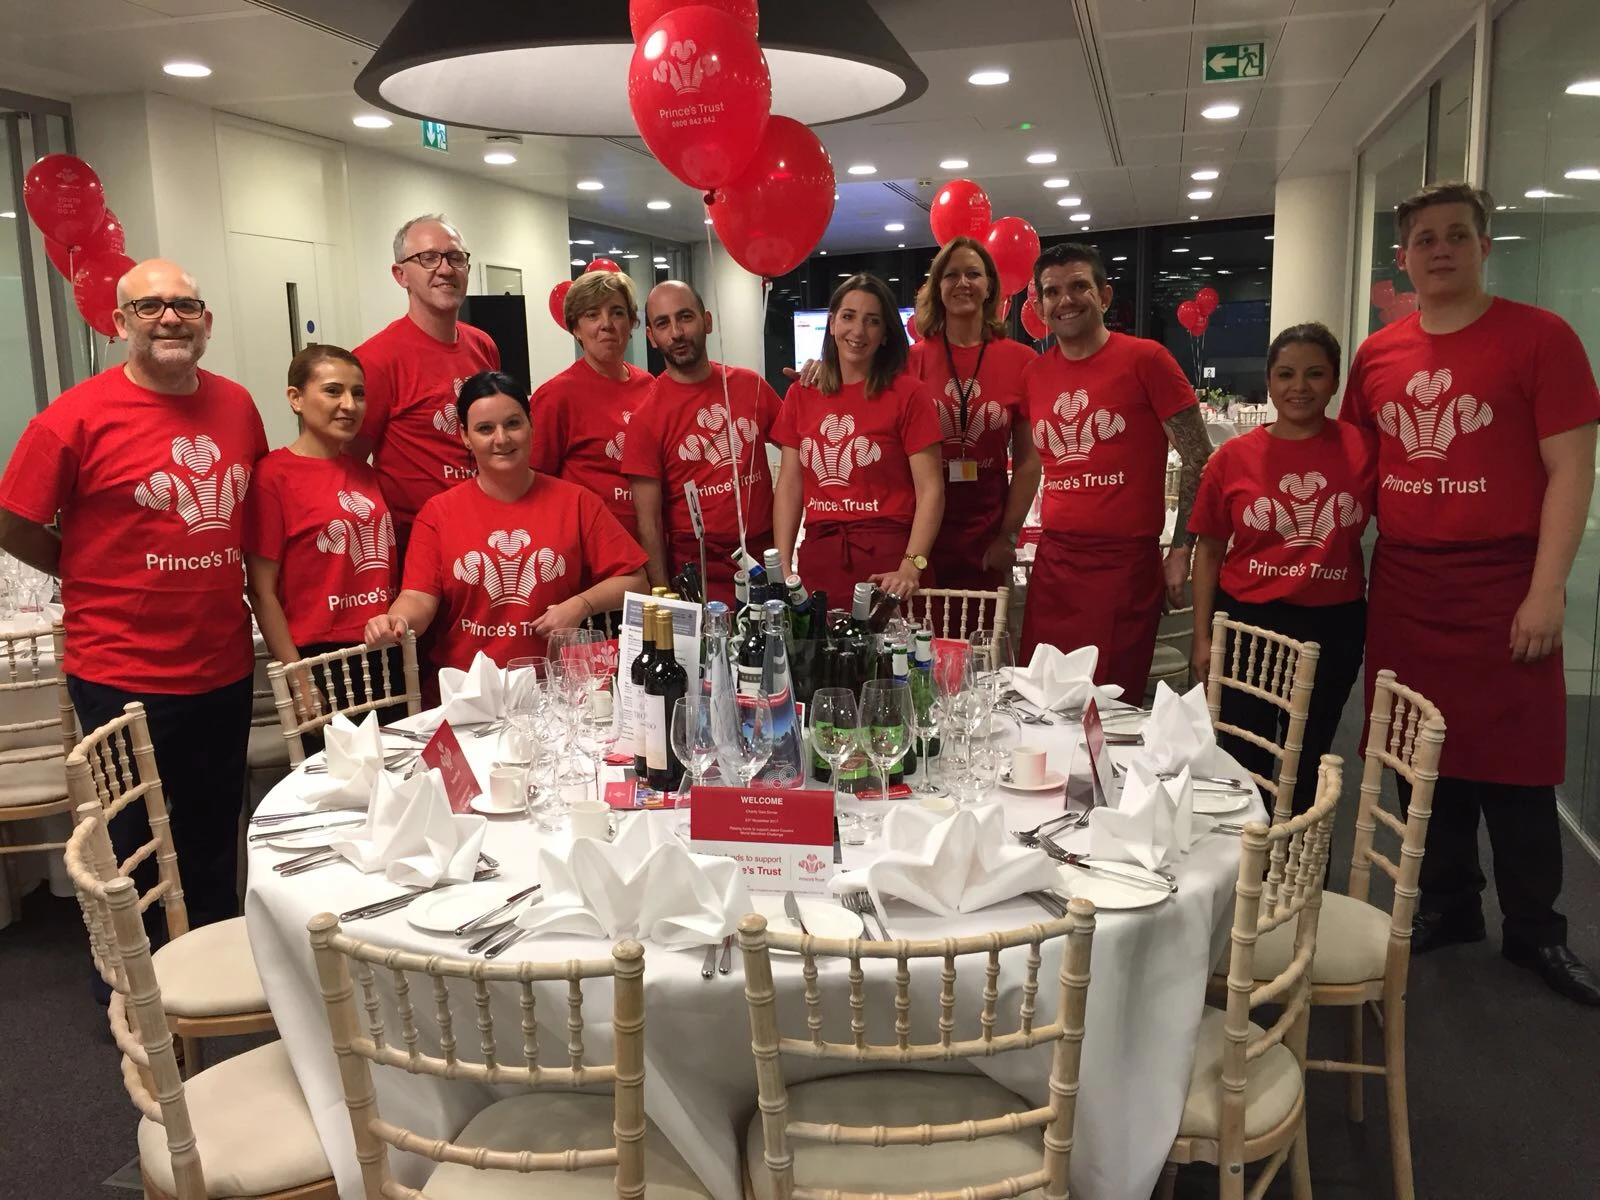 The Prince's Trust team at the Charity Gala hosted by Jason Cousins at Womble Bond Dickinson offices in London